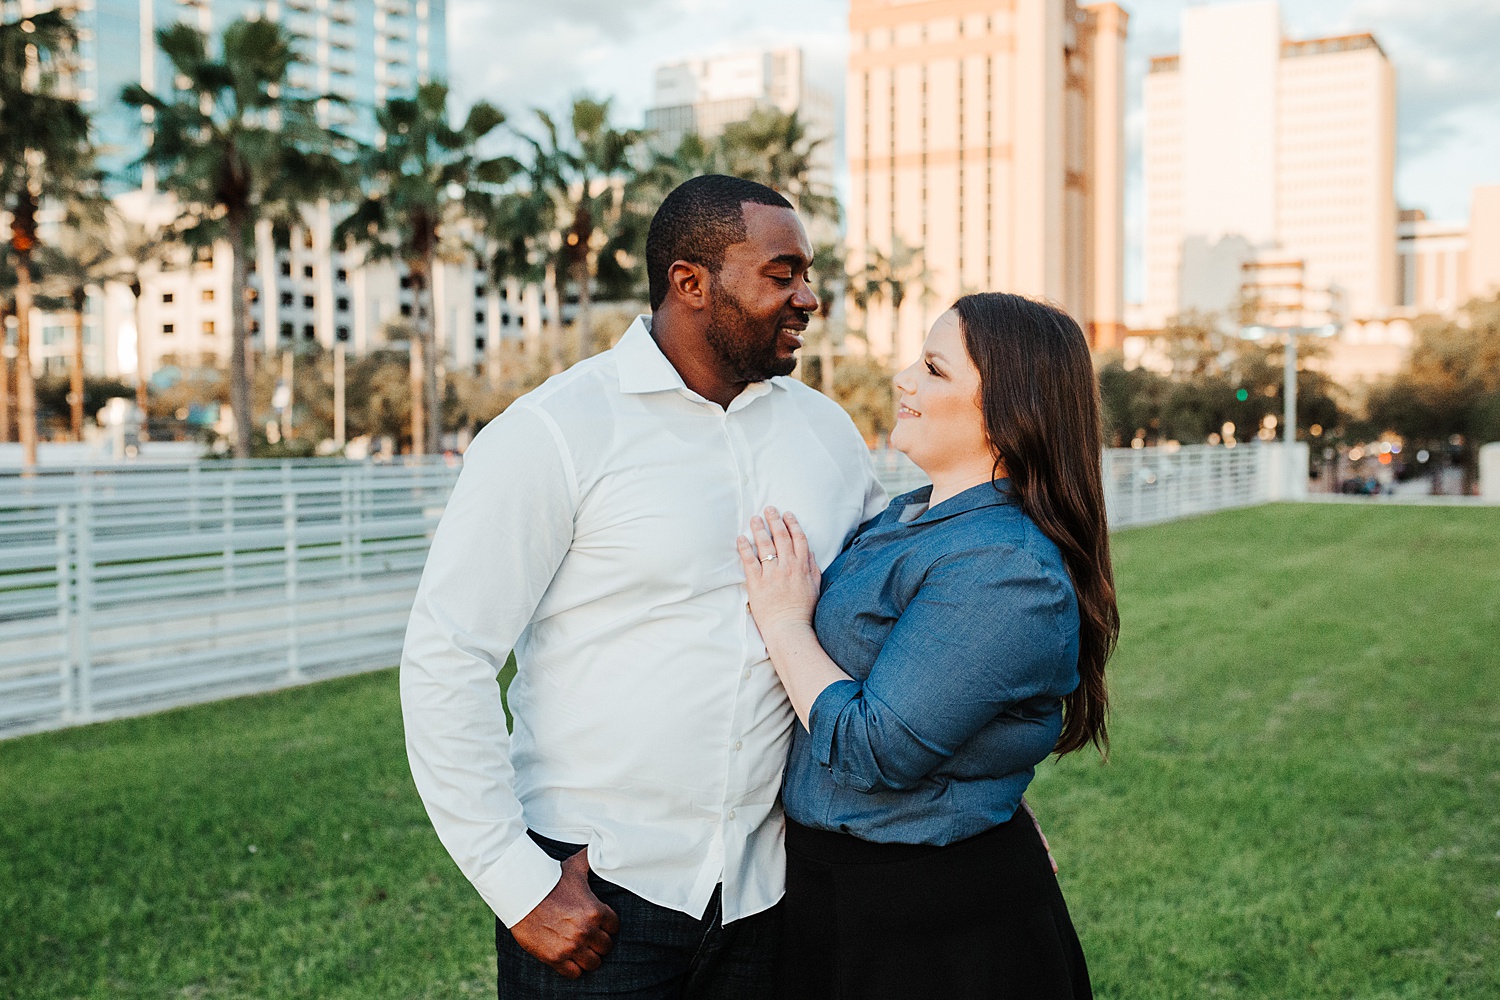 Downtown Tampa Engagement Photos, Downtown Tampa Engagement Photo Ideas, Tampa Wedding Photographers, Ashley Izquierdo, Tampa Engagement Session Ideas, Tampa Engagement Ideas